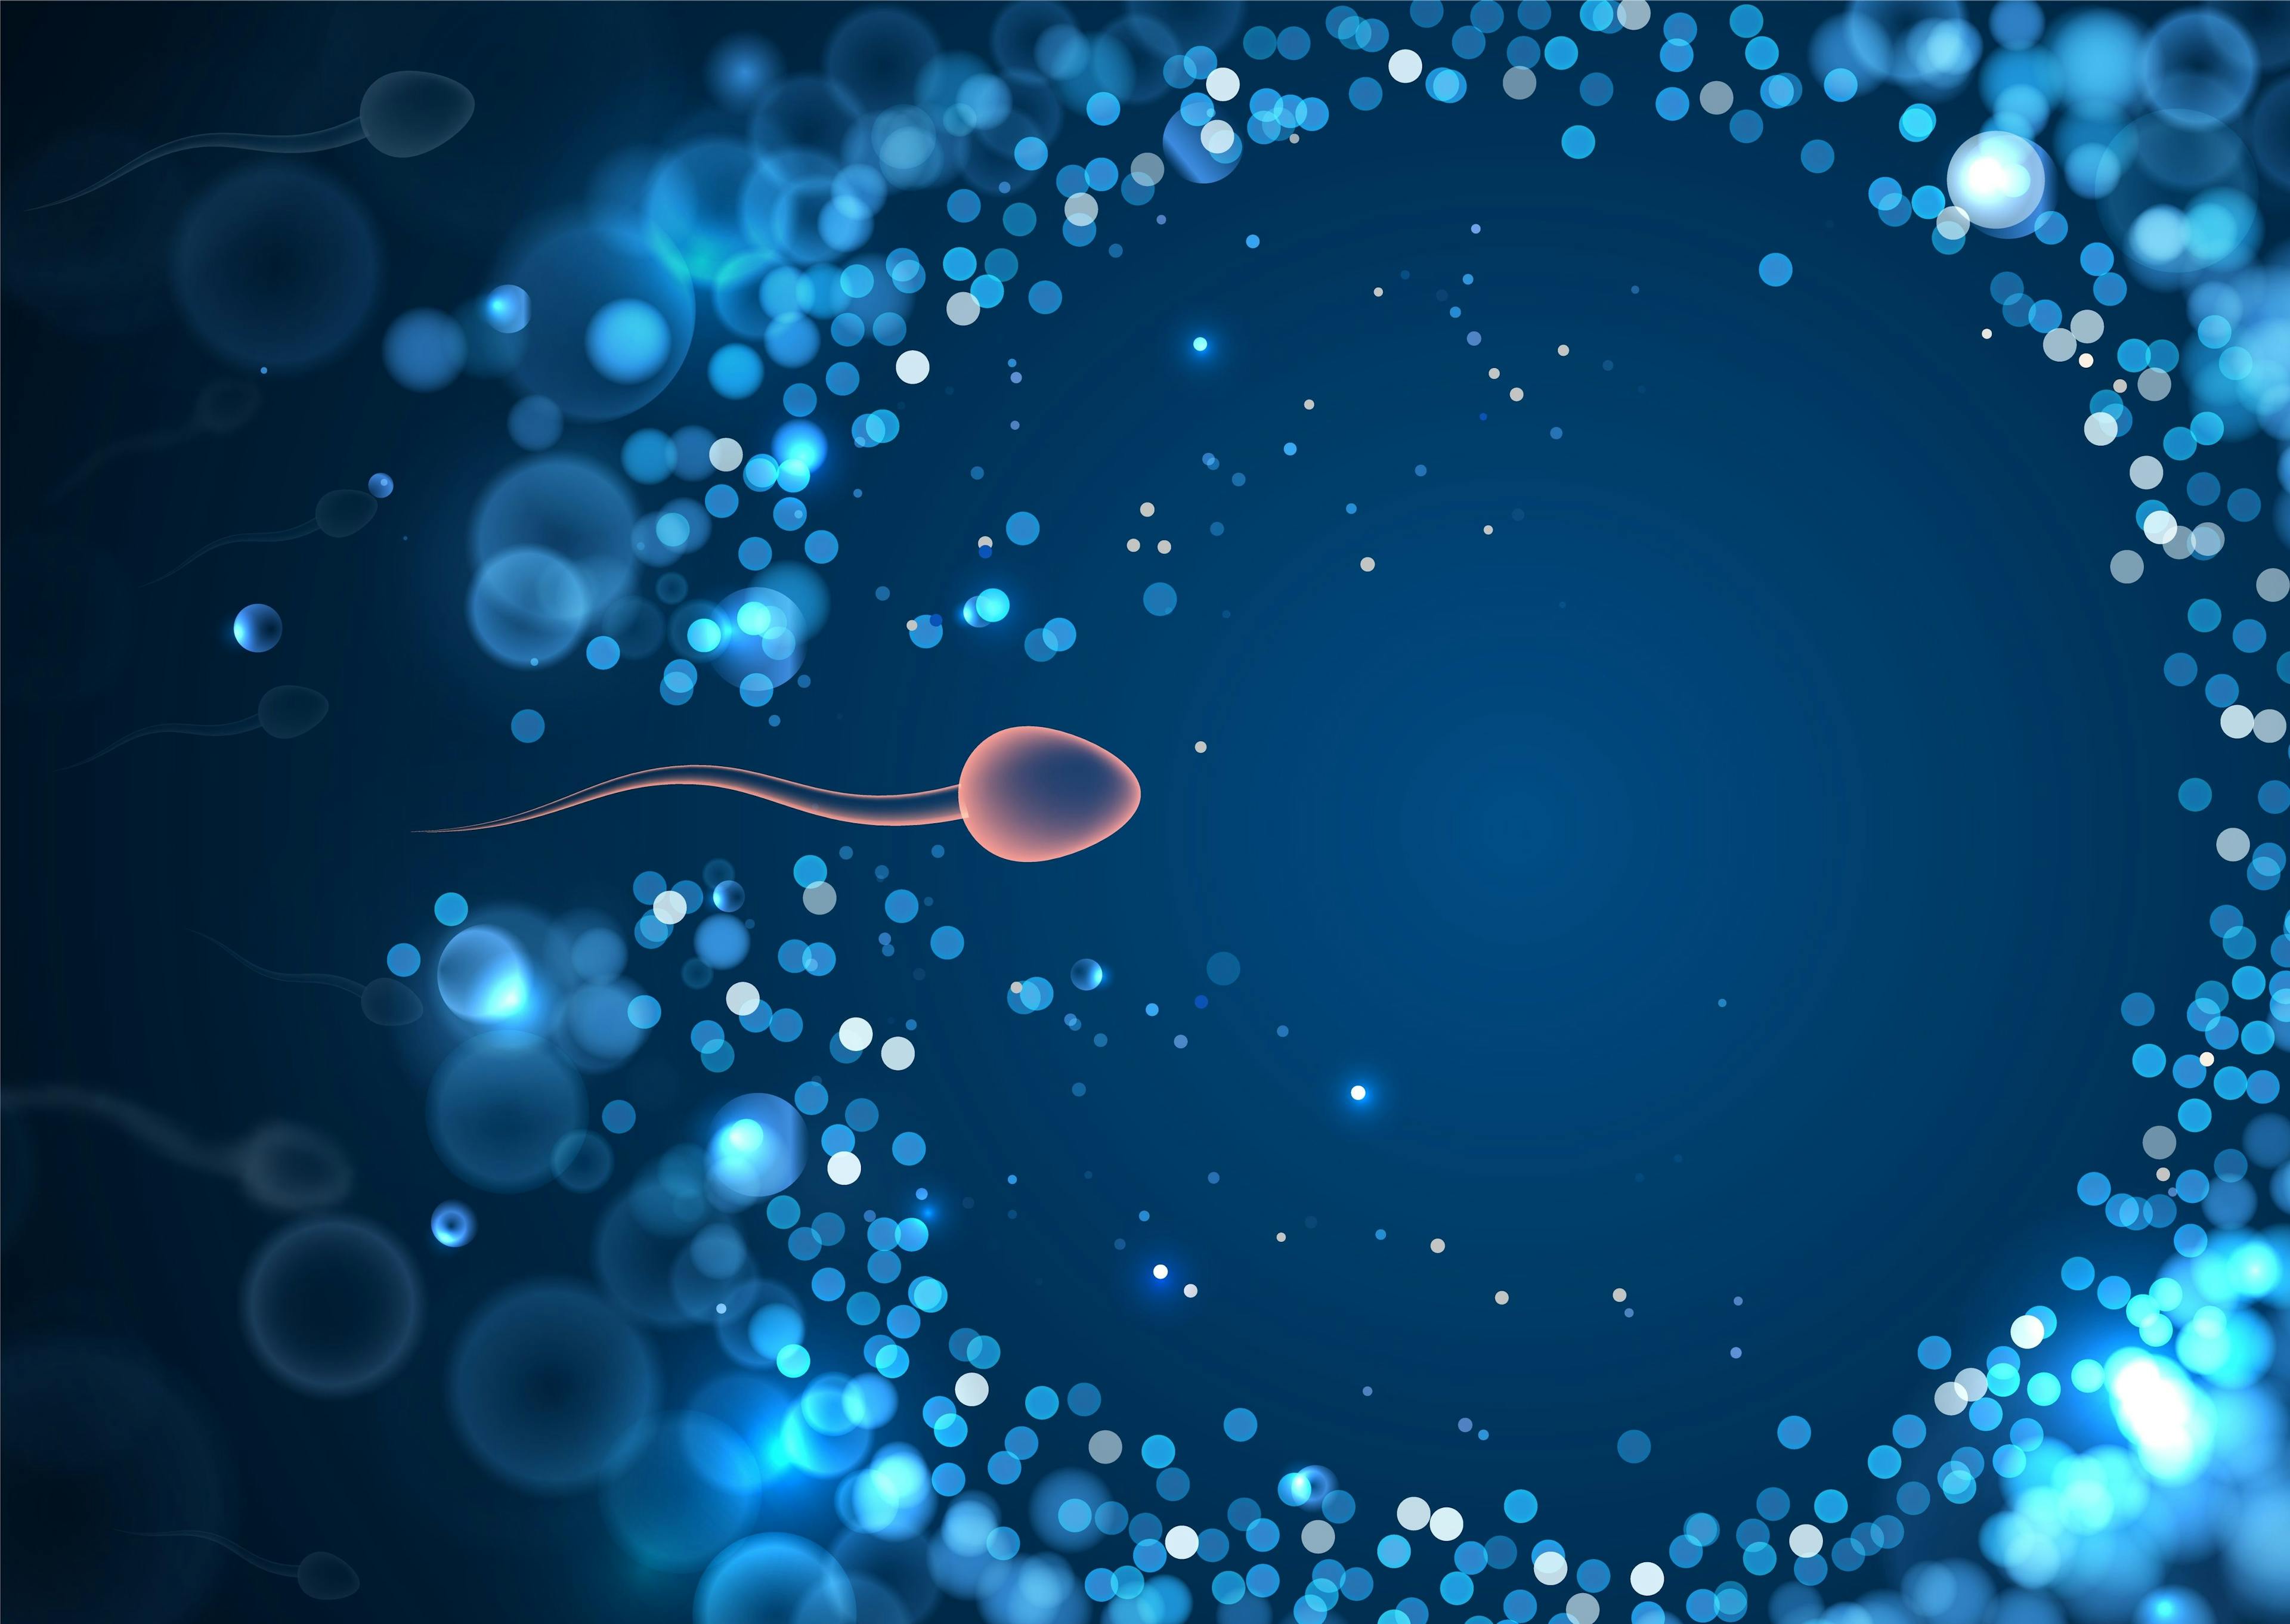 IVF for women with previous recurrent ectopic pregnancy